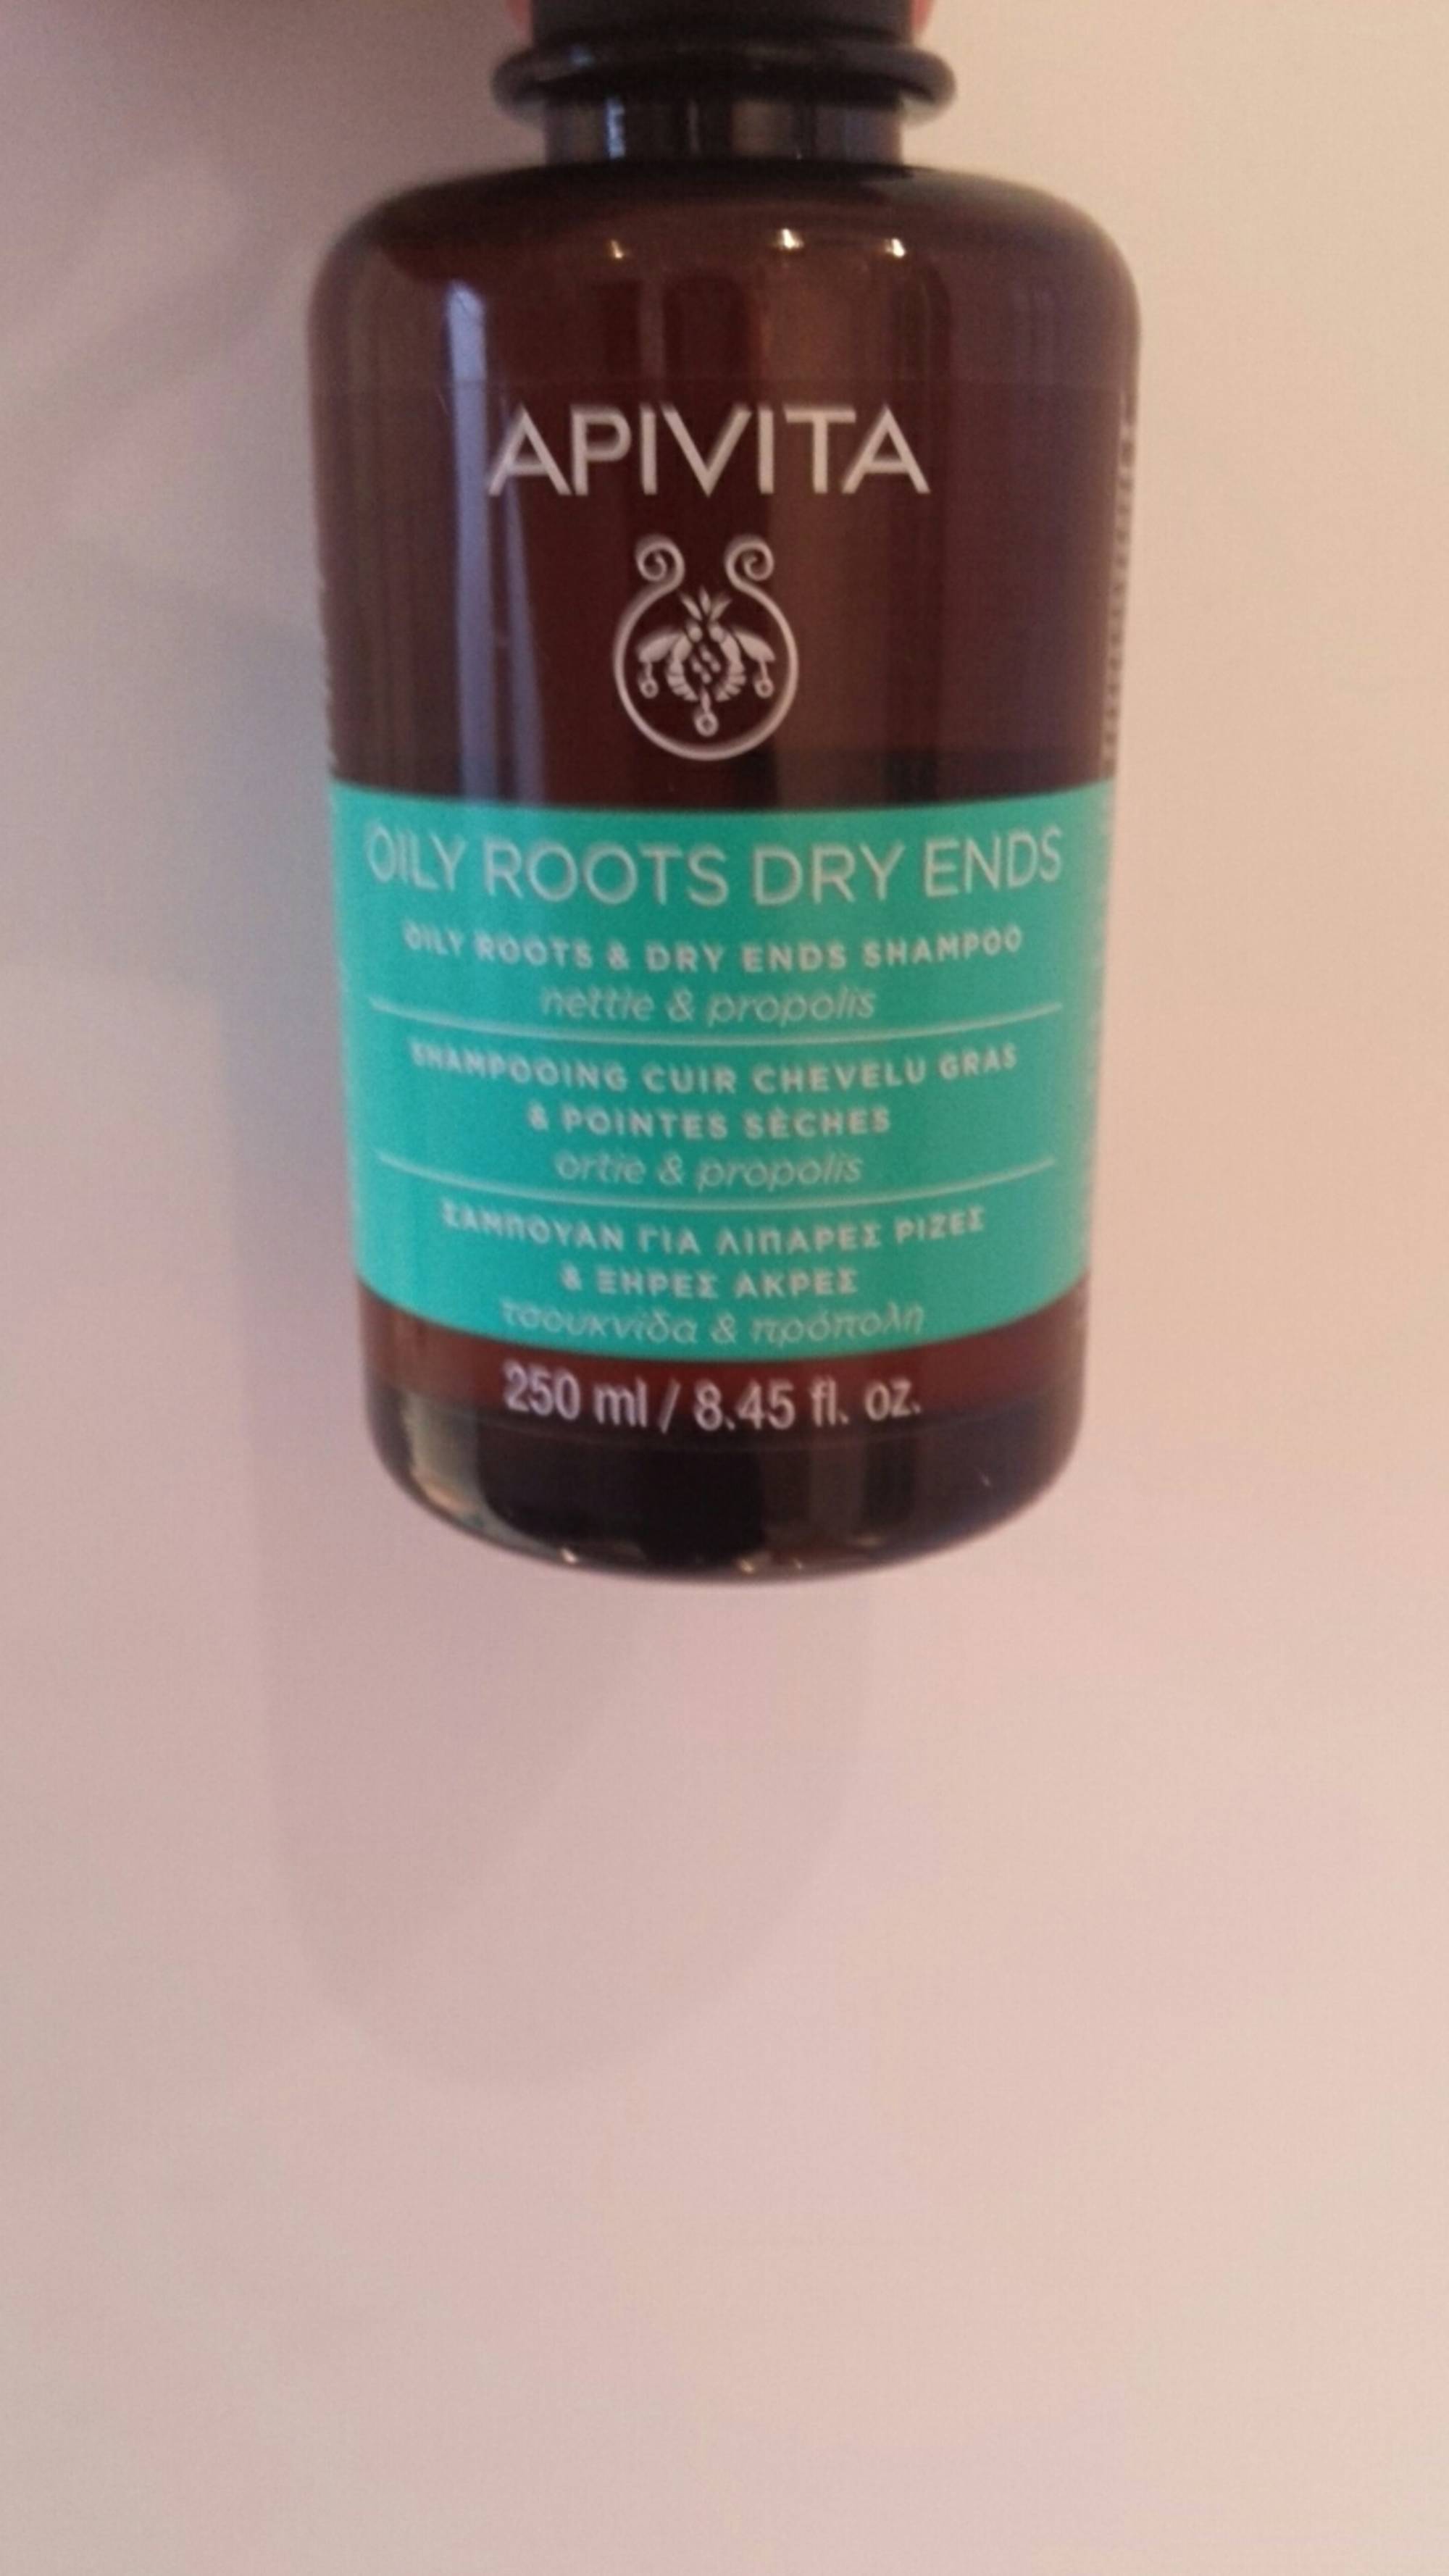 APIVITA - Oily root dry ends - Shampooing cuir chevelu gras & pointes sèches